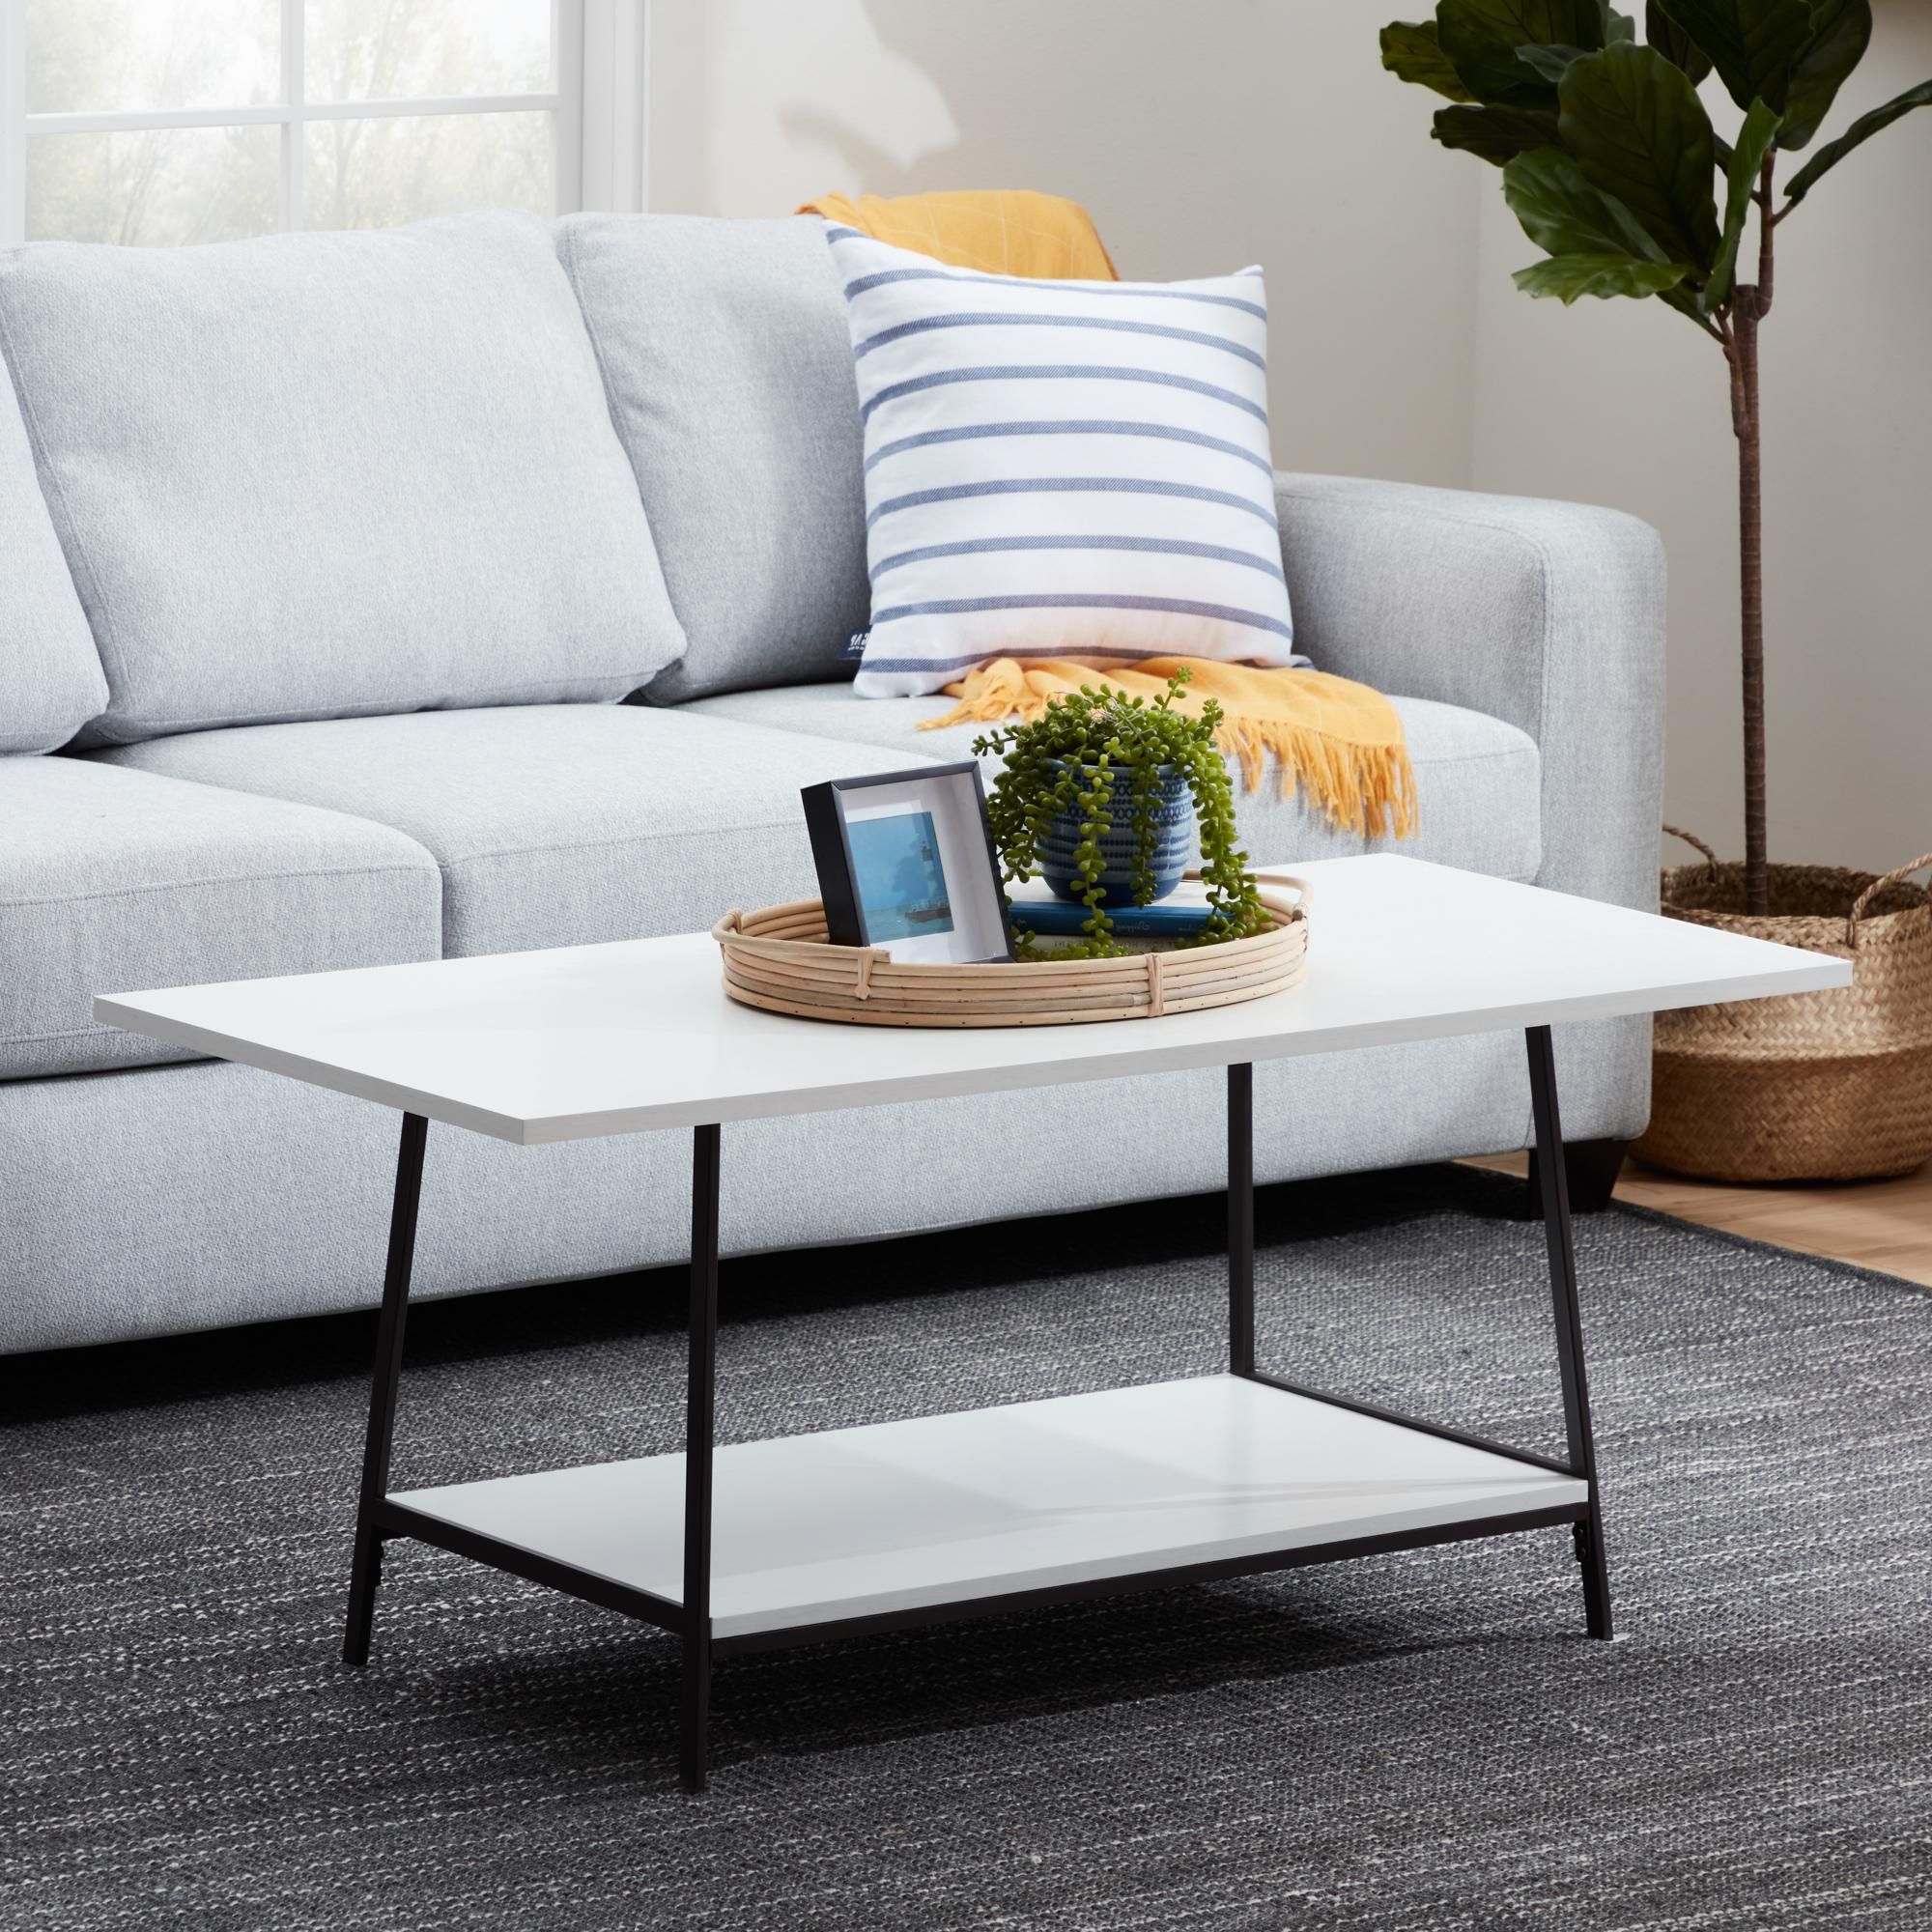 Most Popular Medium Coffee Tables Pertaining To Gap Home Wood And Metal Rectangle Coffee Table, Medium Oak – Walmart (View 13 of 20)